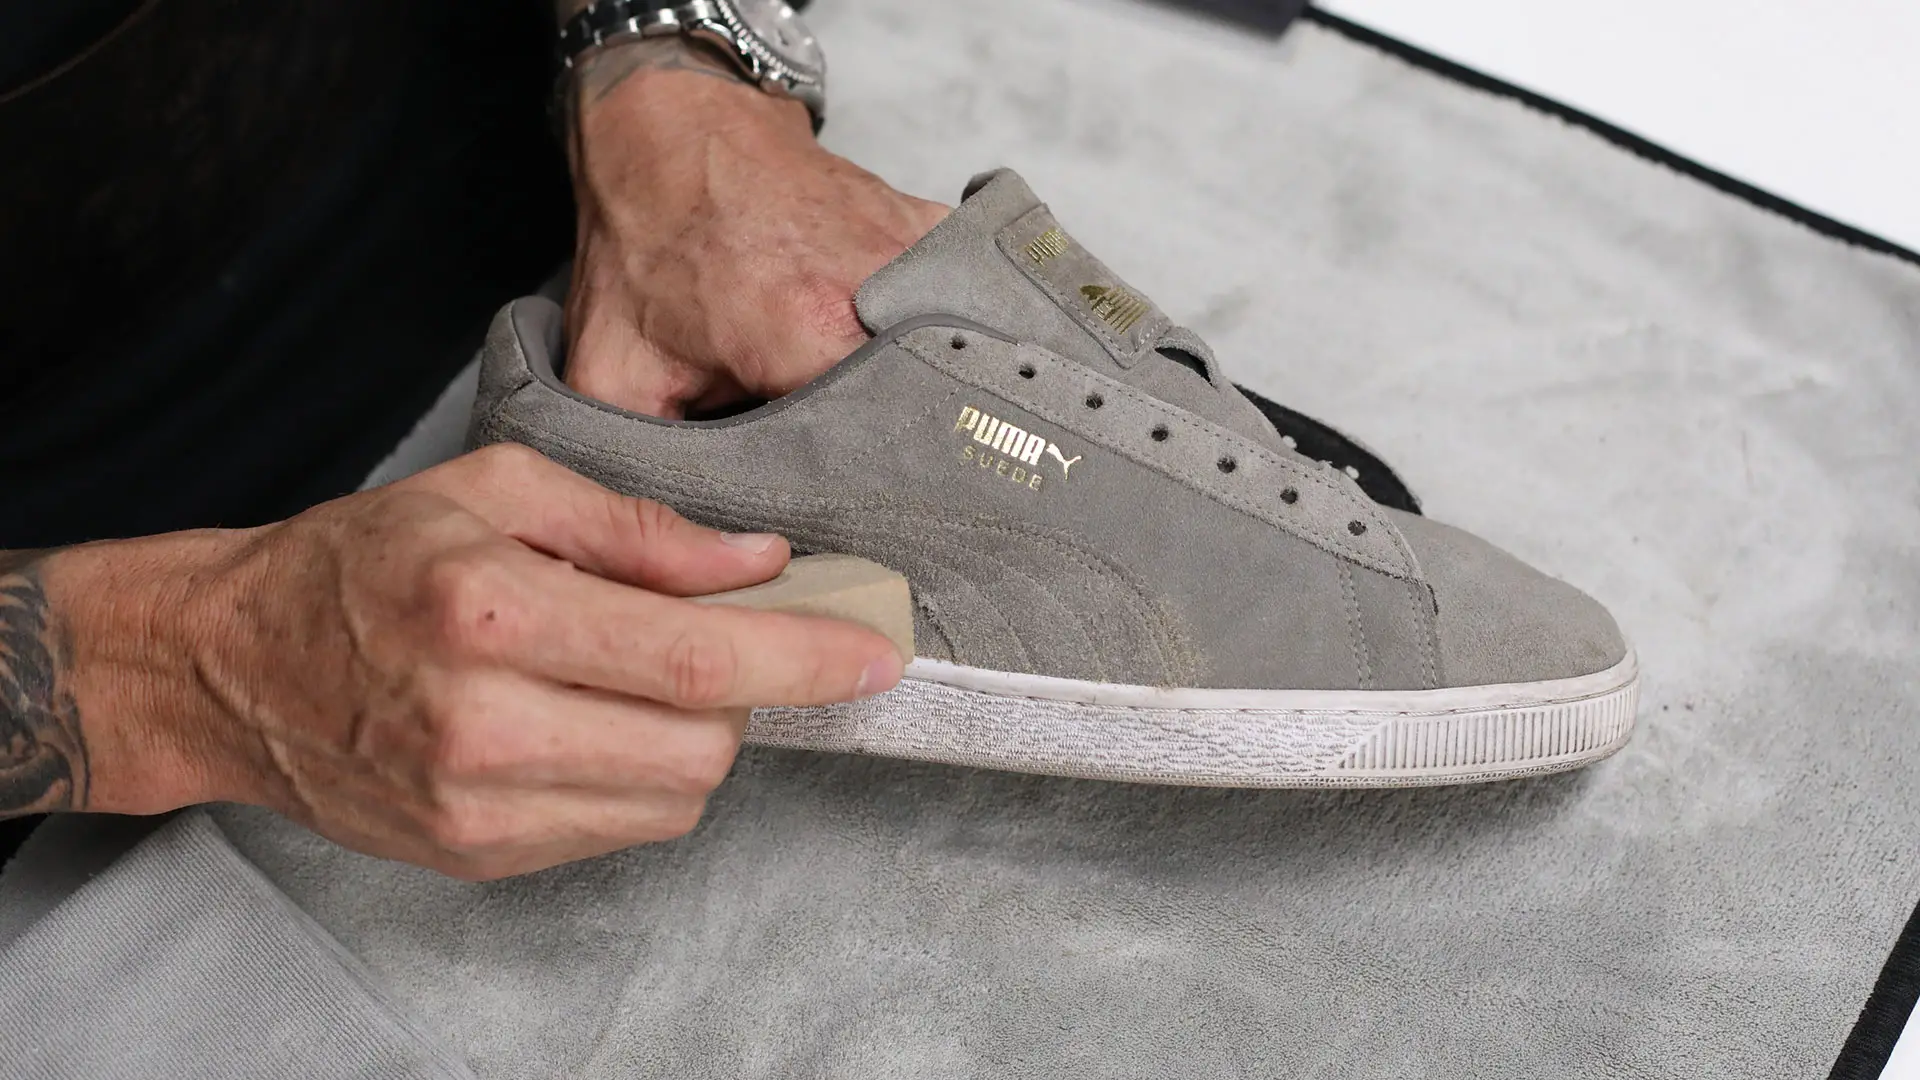 How to Clean Suede Pumas at Home